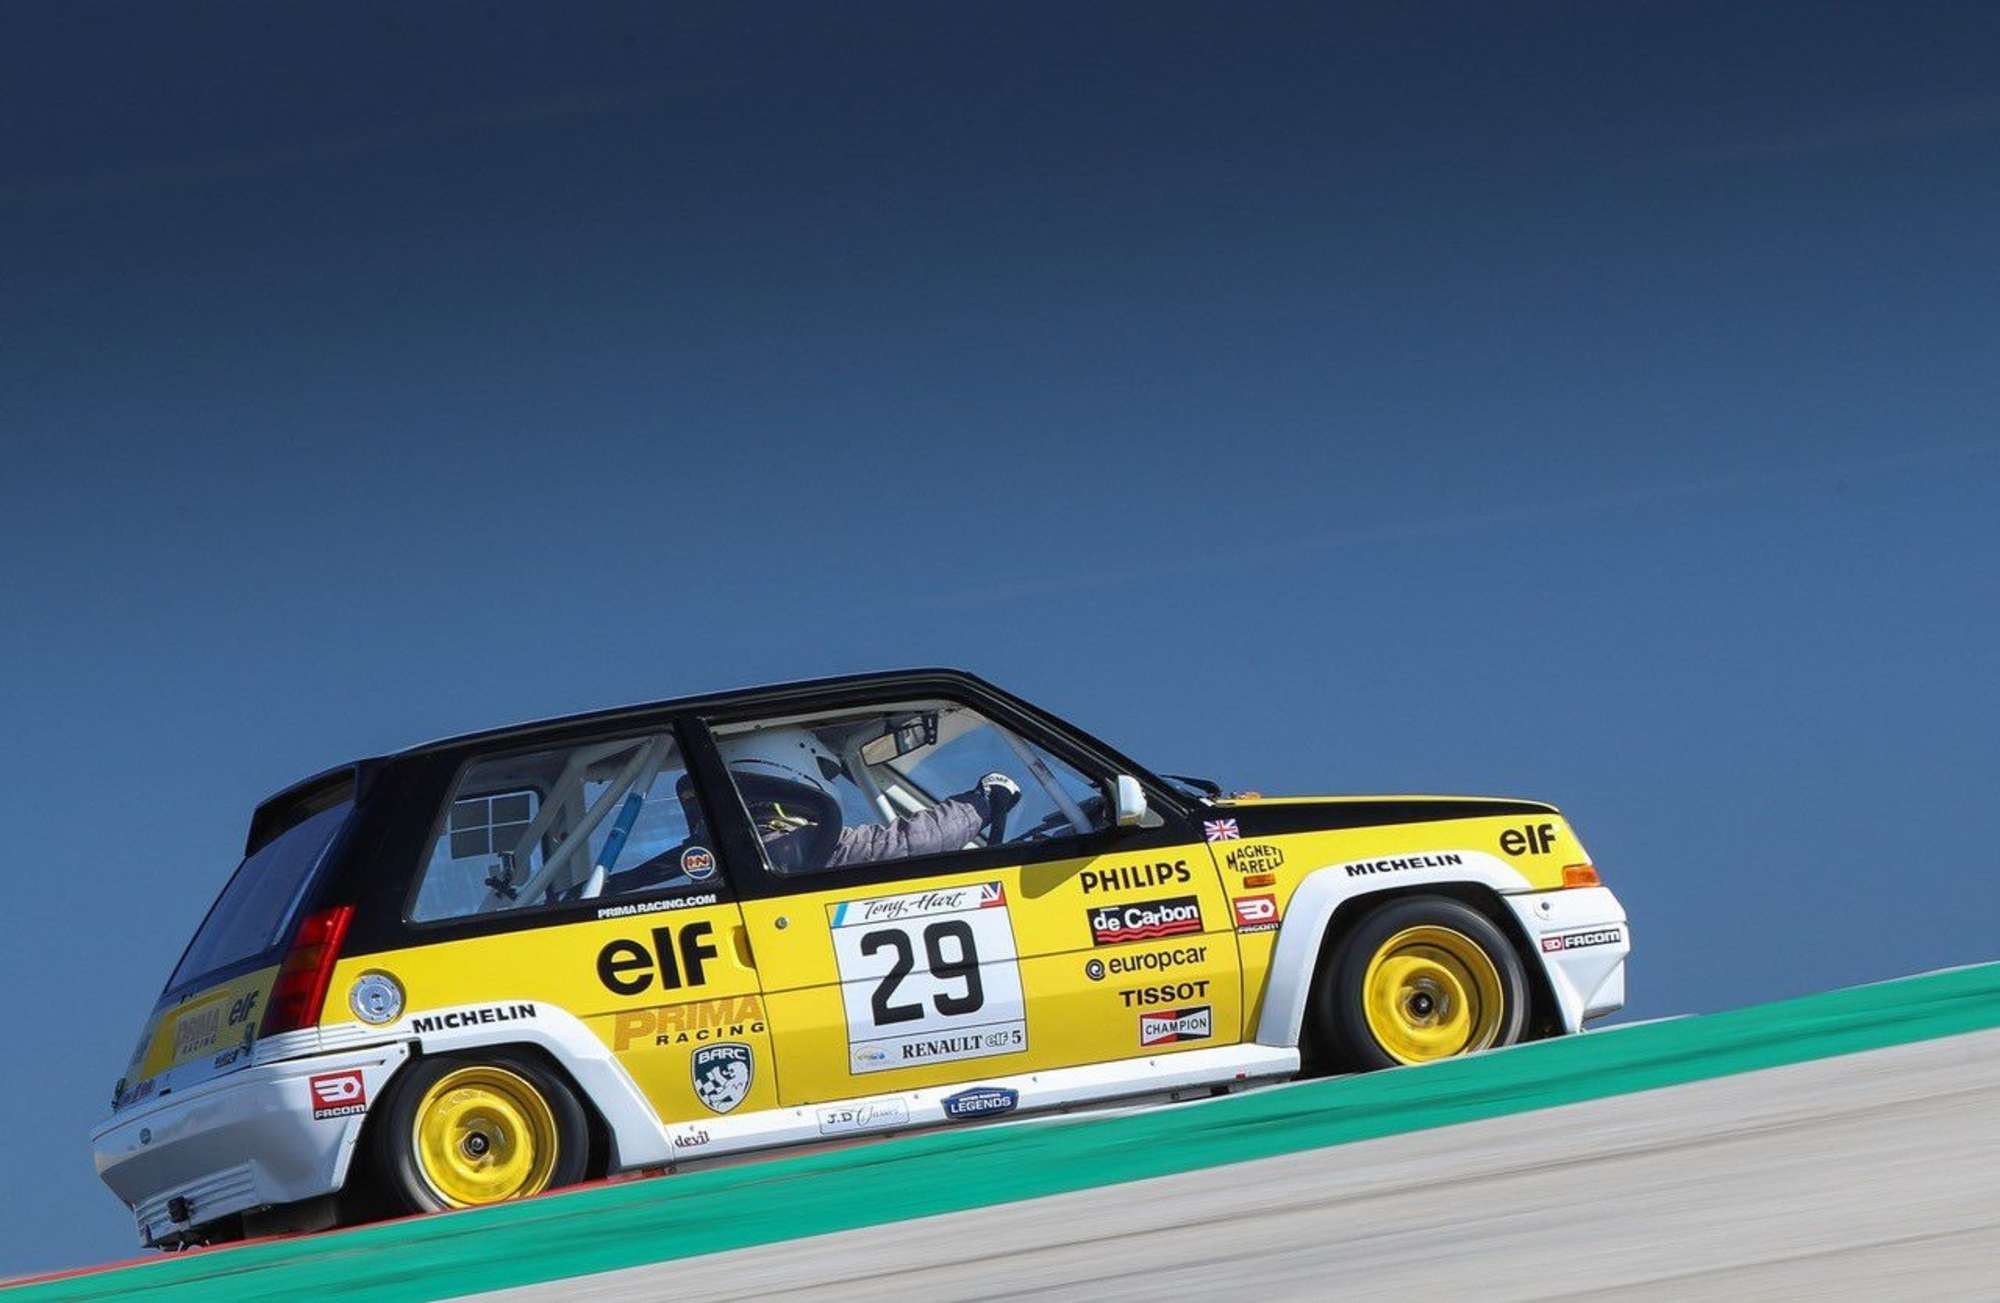 Feeling competitive? 10 ready-to-race cars at the Race Retro sale